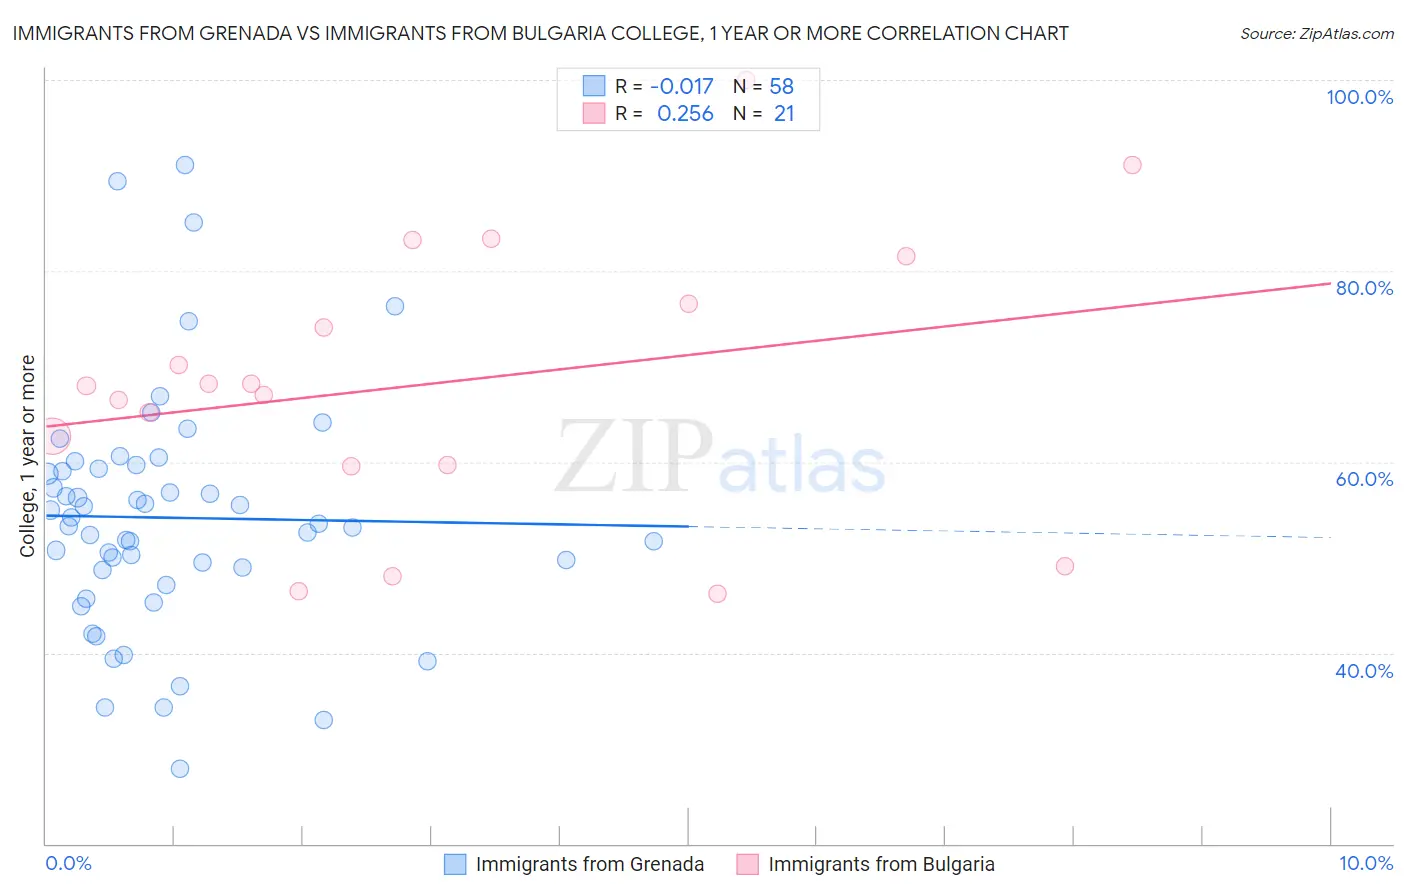 Immigrants from Grenada vs Immigrants from Bulgaria College, 1 year or more